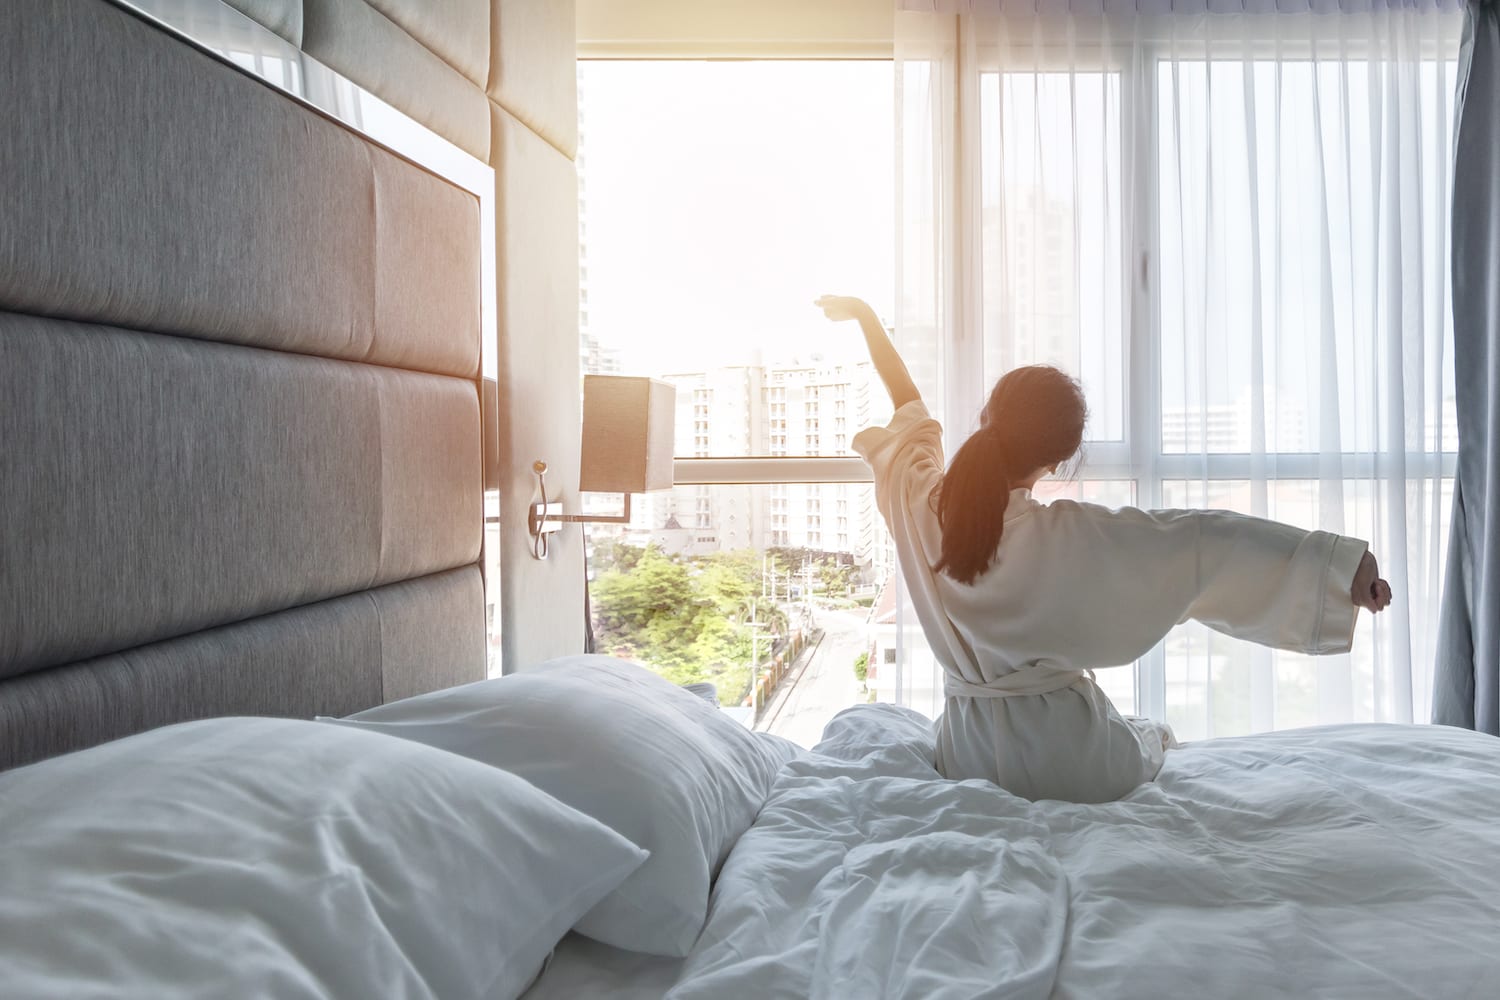 How To Get a Good Night’s Sleep in a Hotel